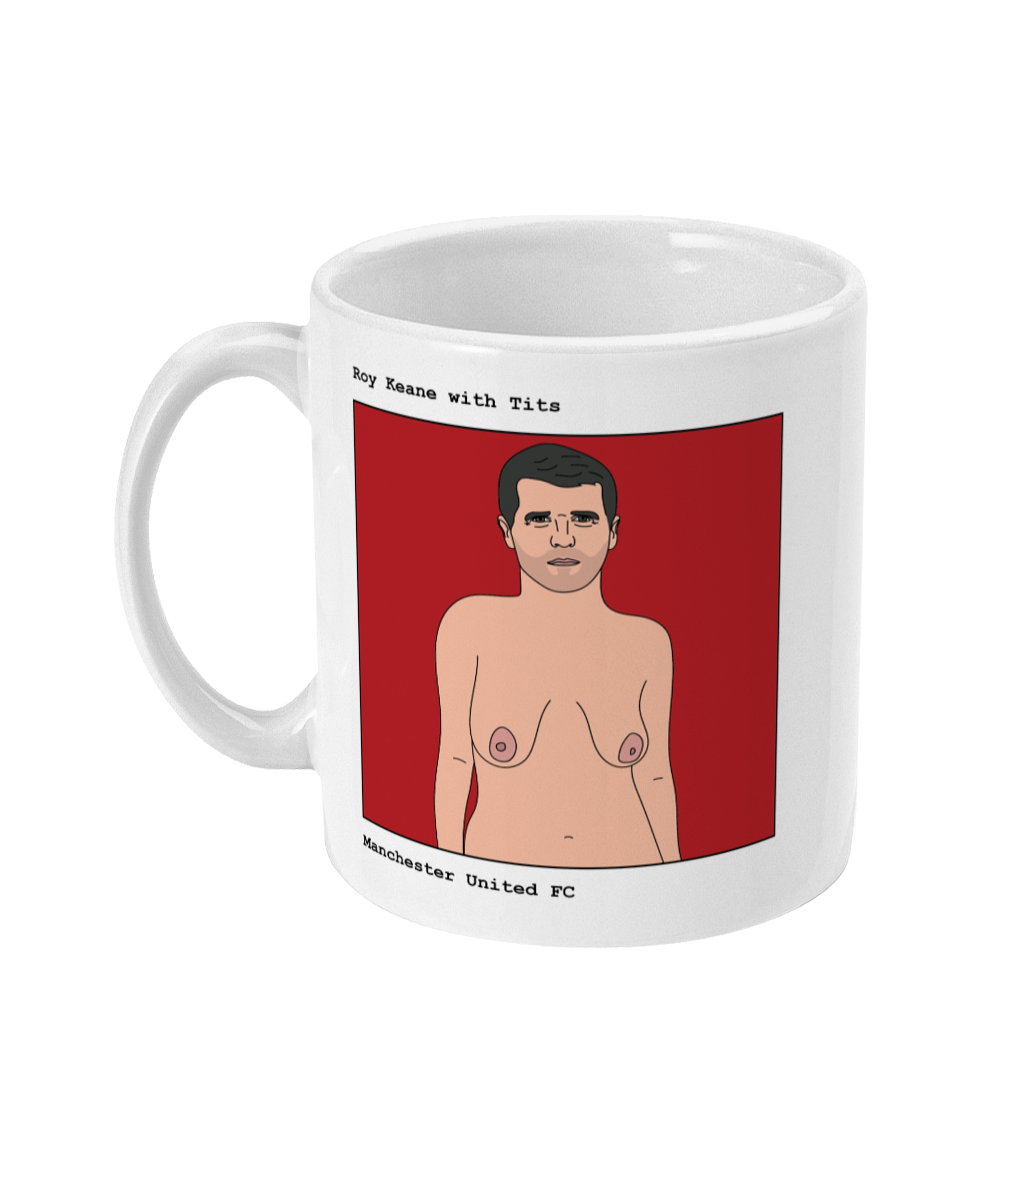 Roy Keane with Tits - Footballers with Tits